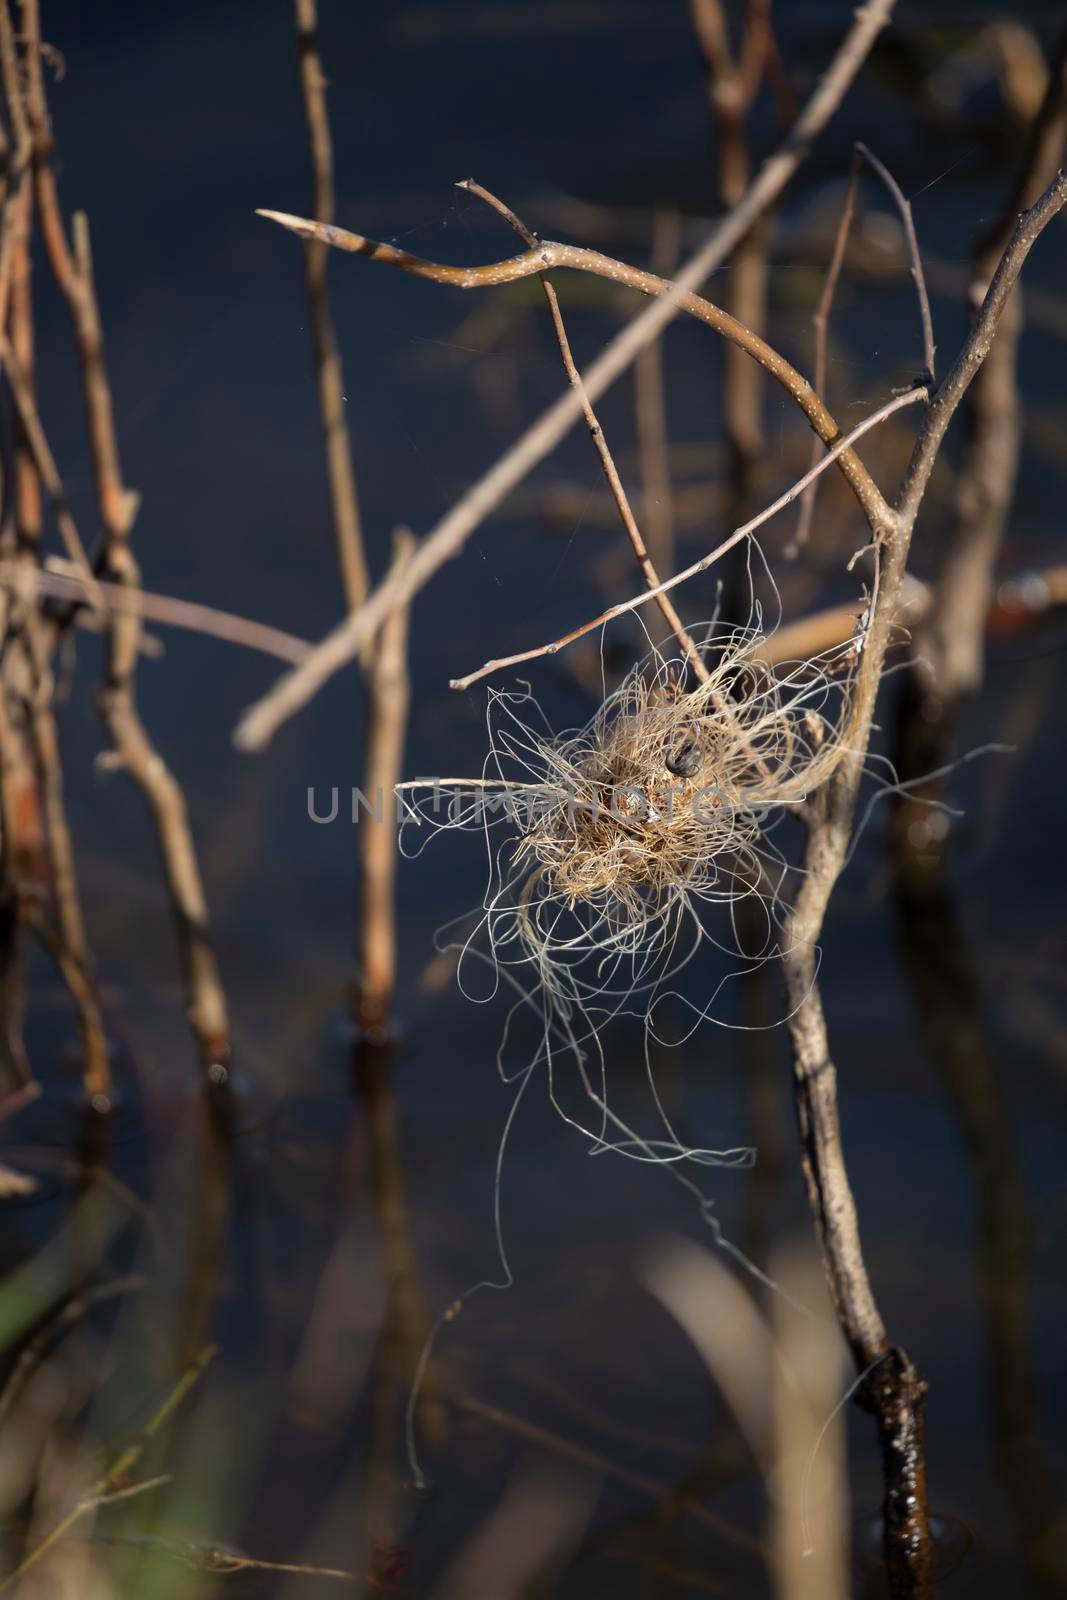 Tangled fishing line in a ball near plants jutting out of shallow water